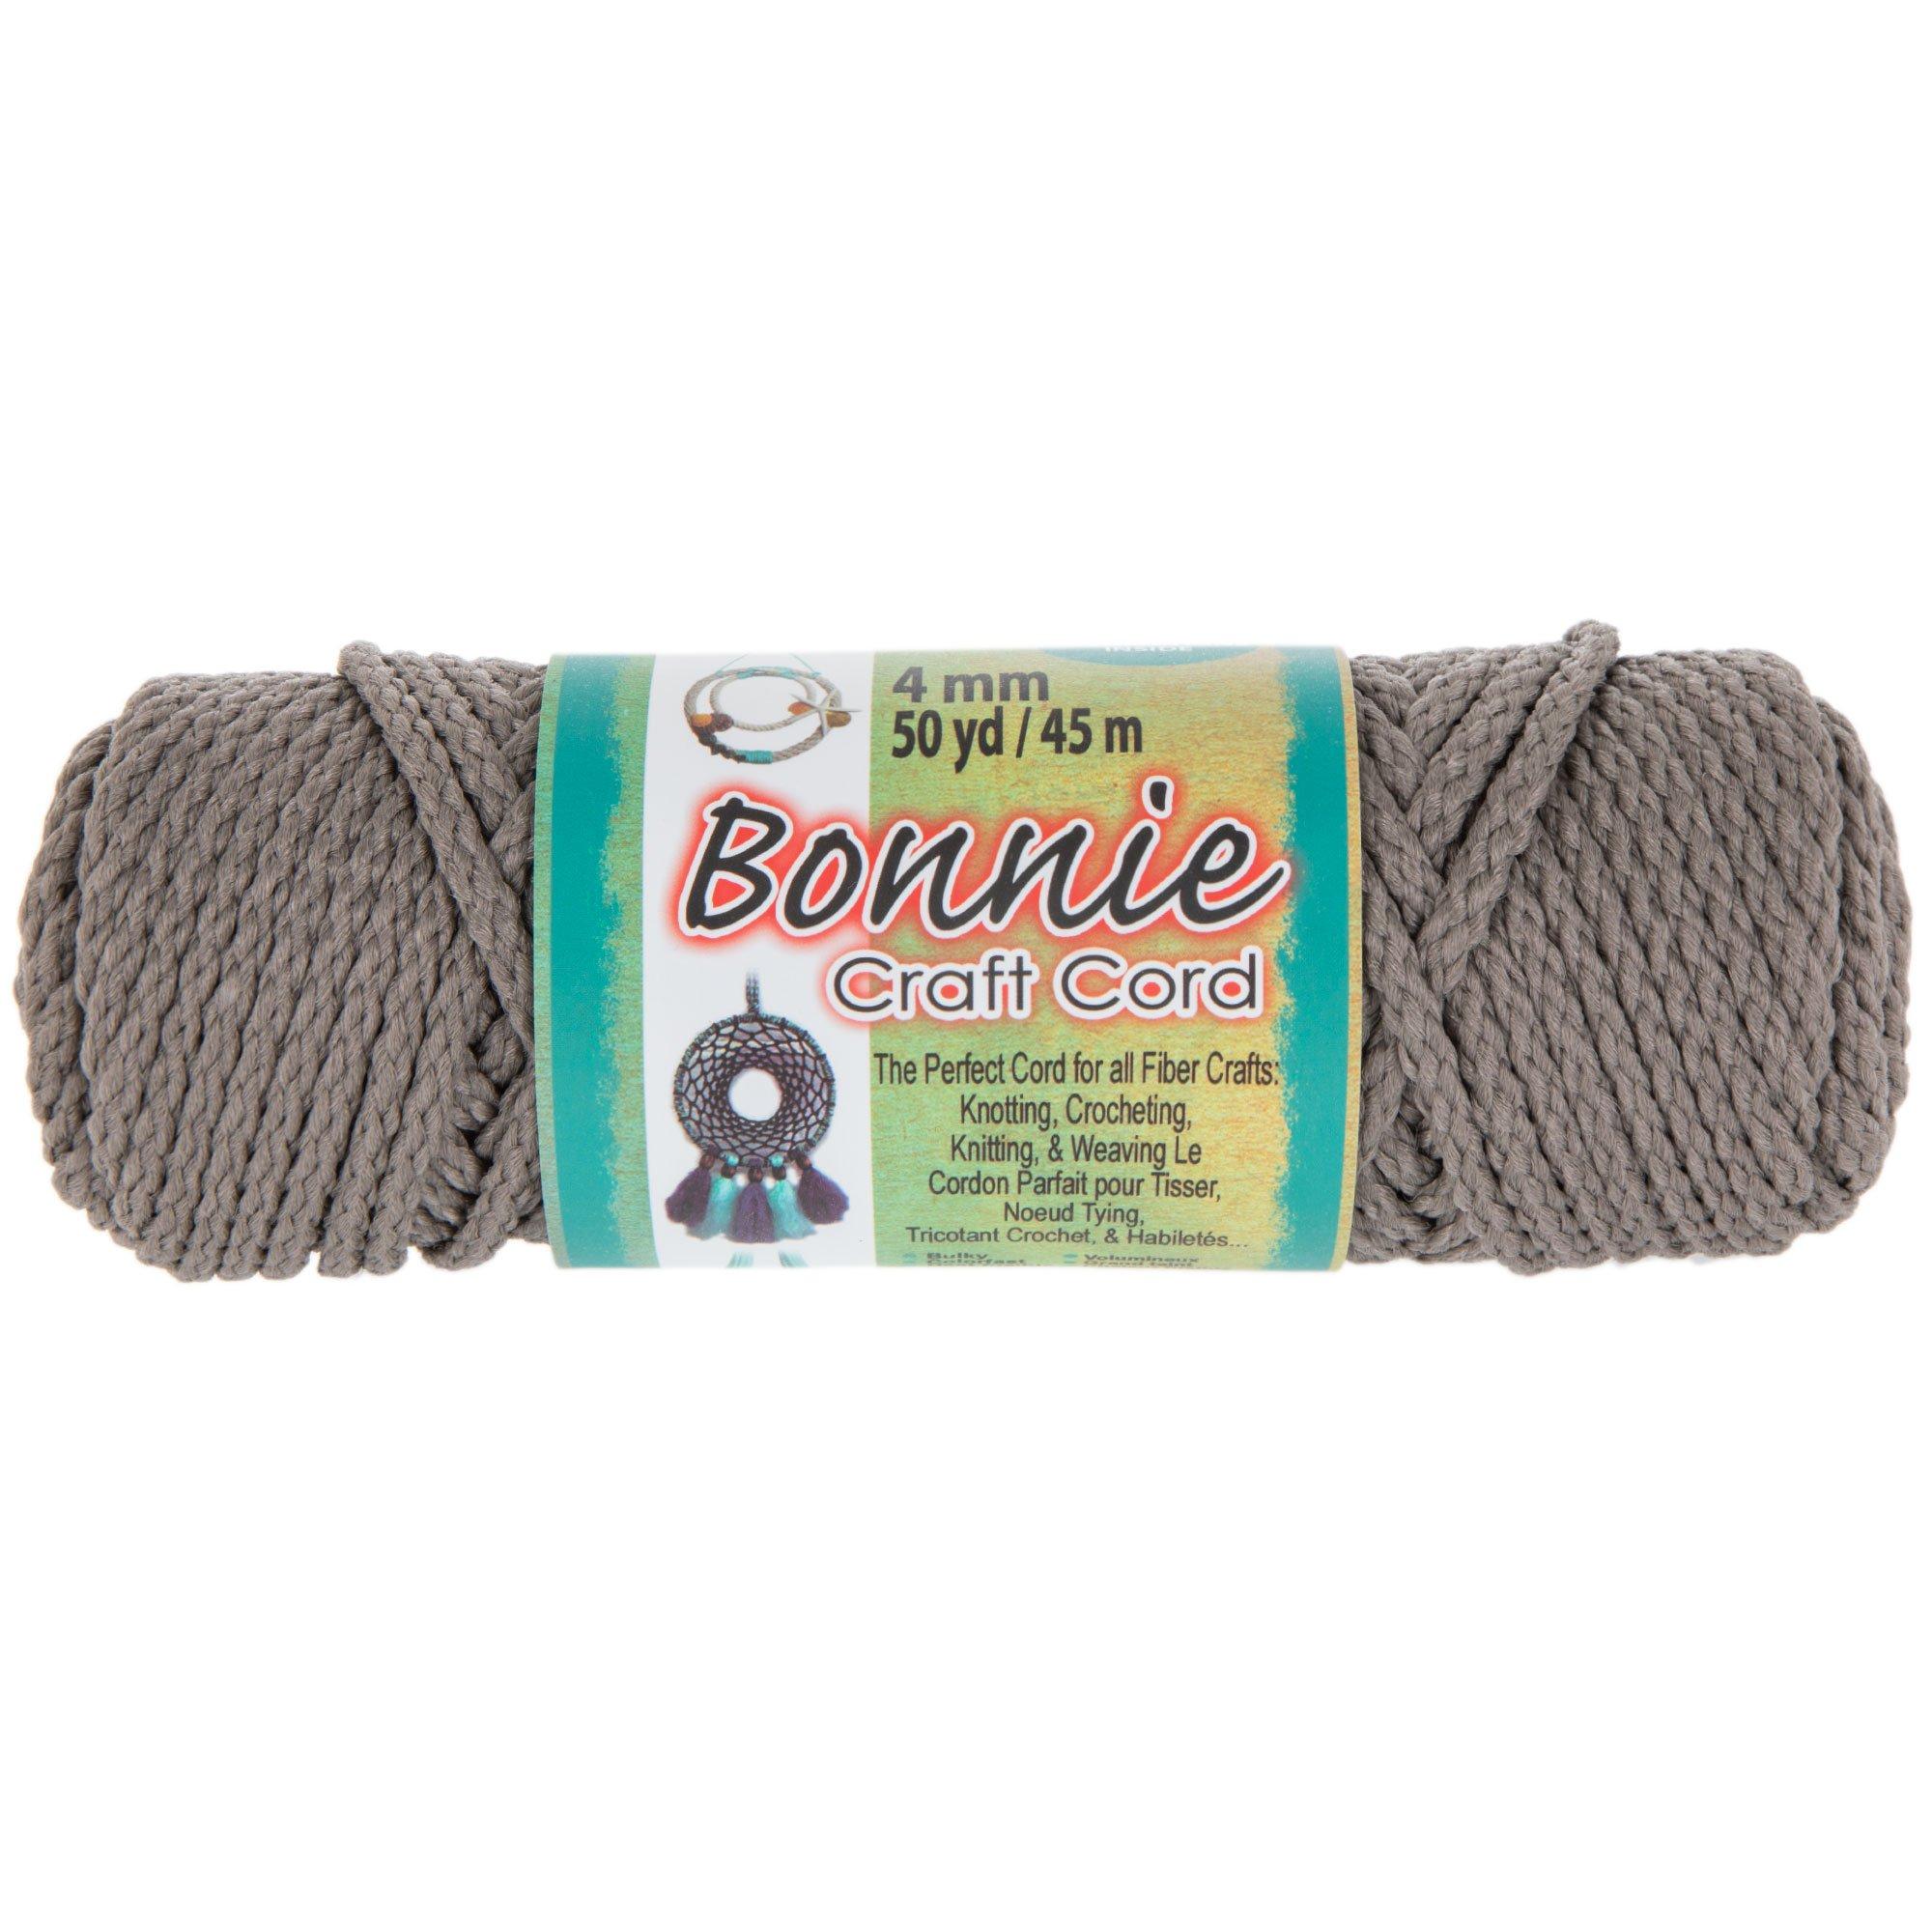 BONNIE Craft Cord TURQUOISE 6mm Macrame Cord 100 Yds Heat Fusible